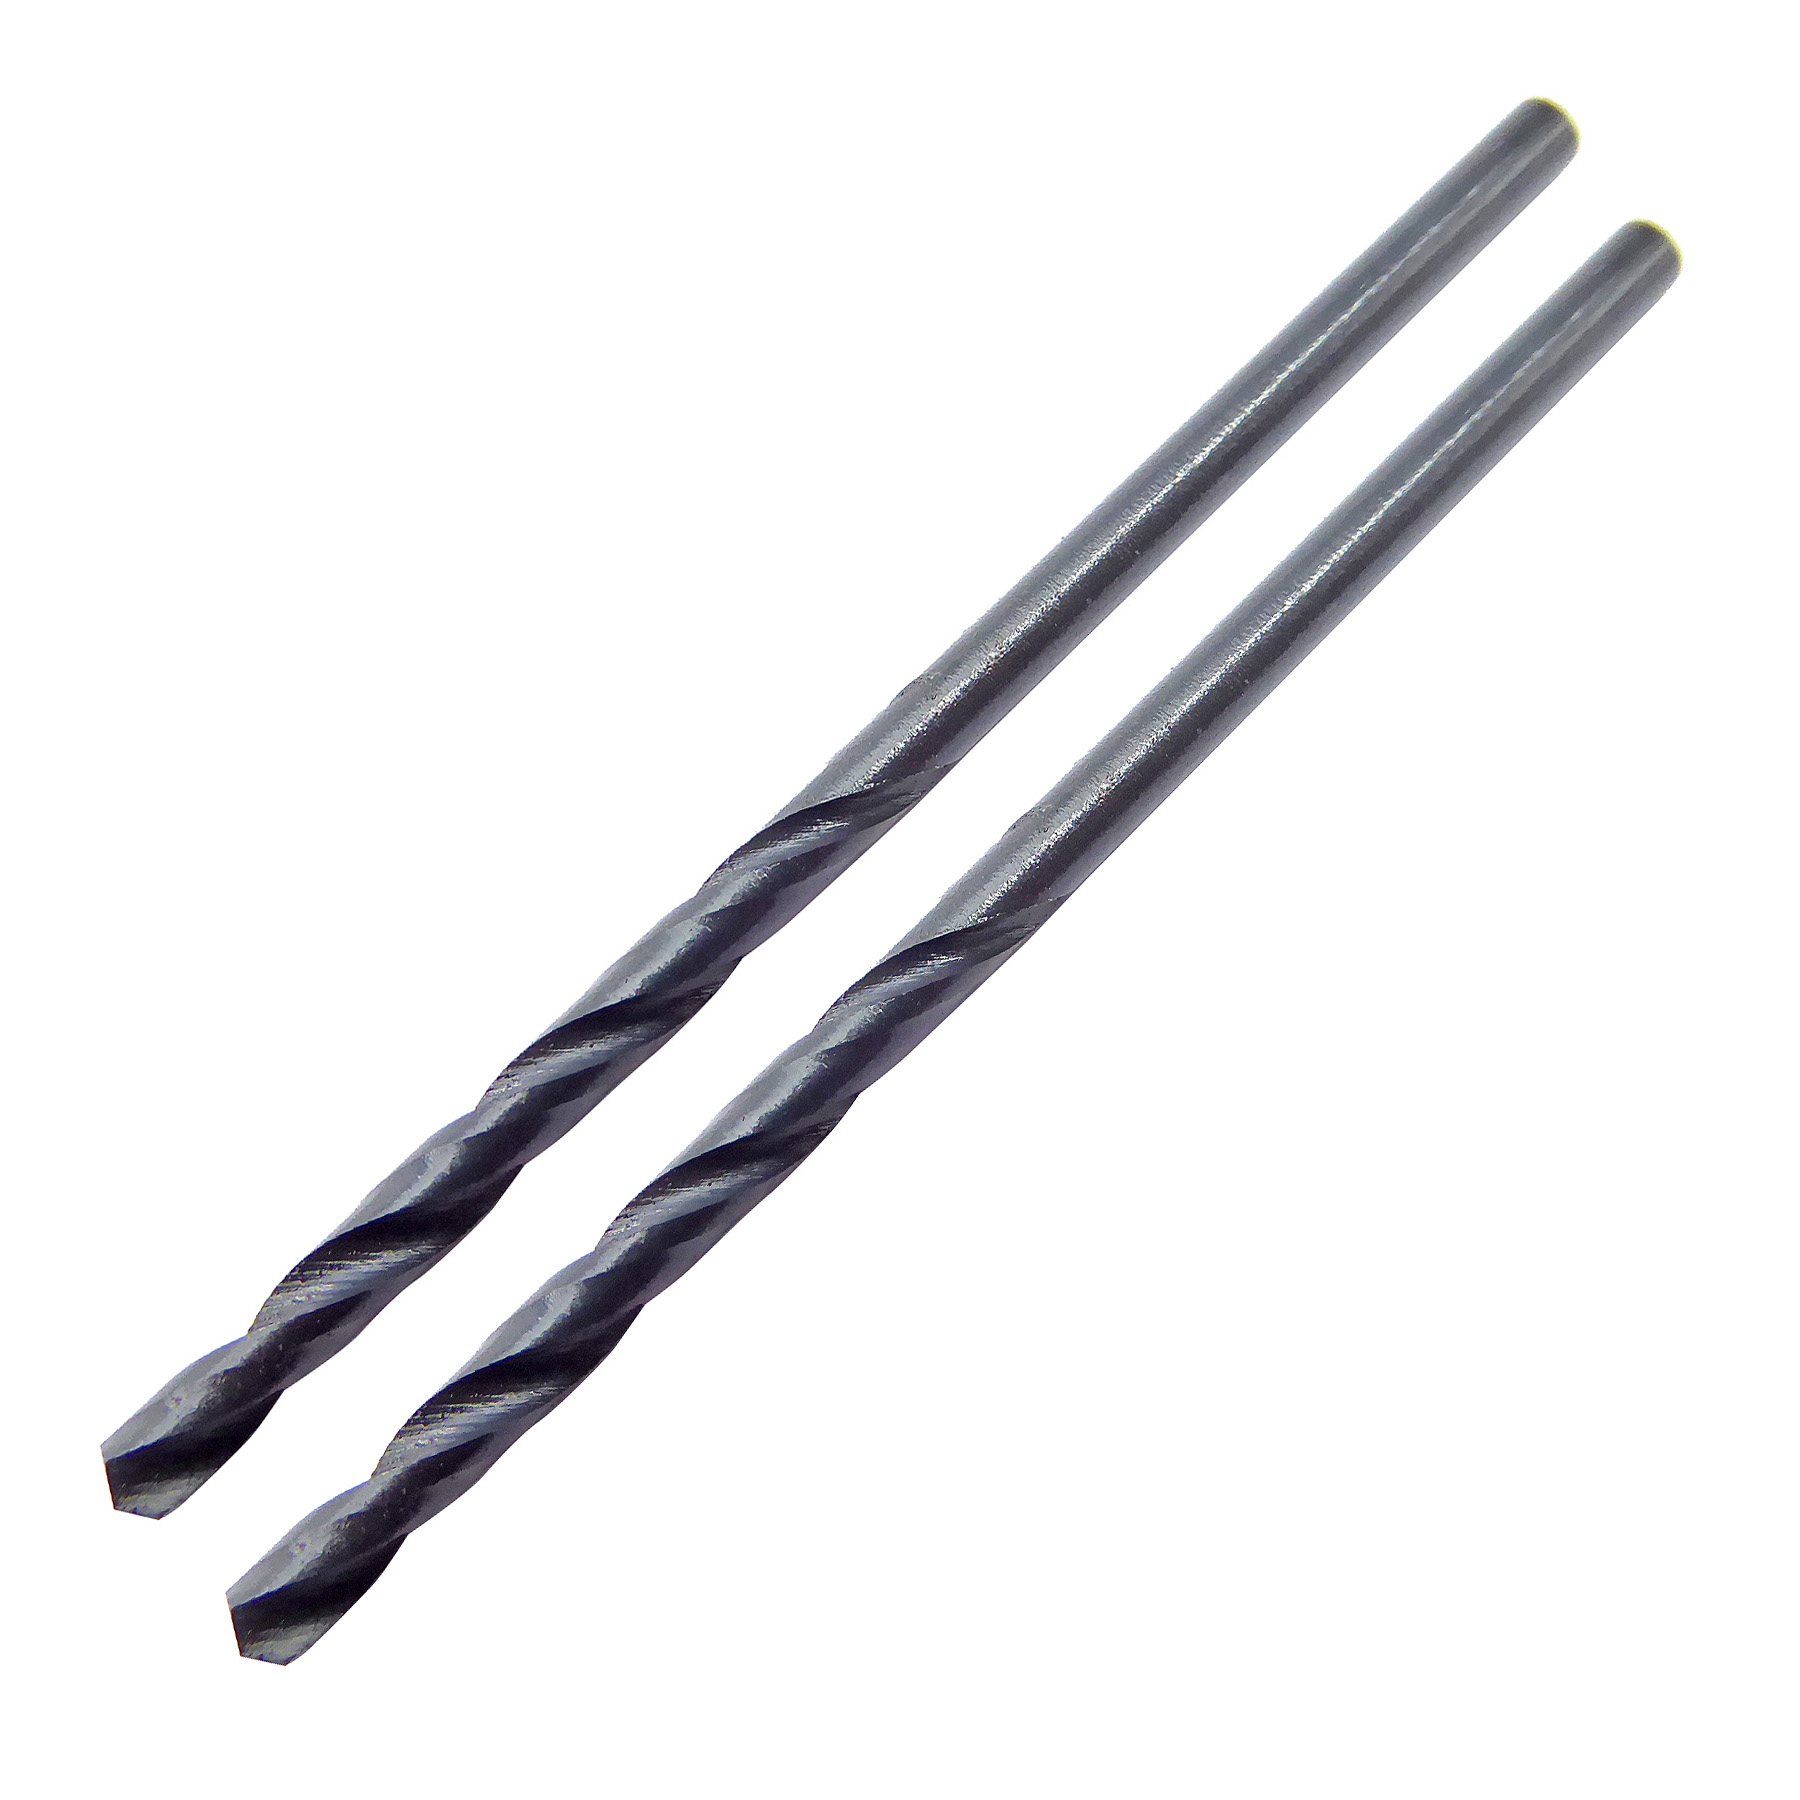 2.5mm x 57mm HSS Roll Forged Jobber Drill Pack of 2